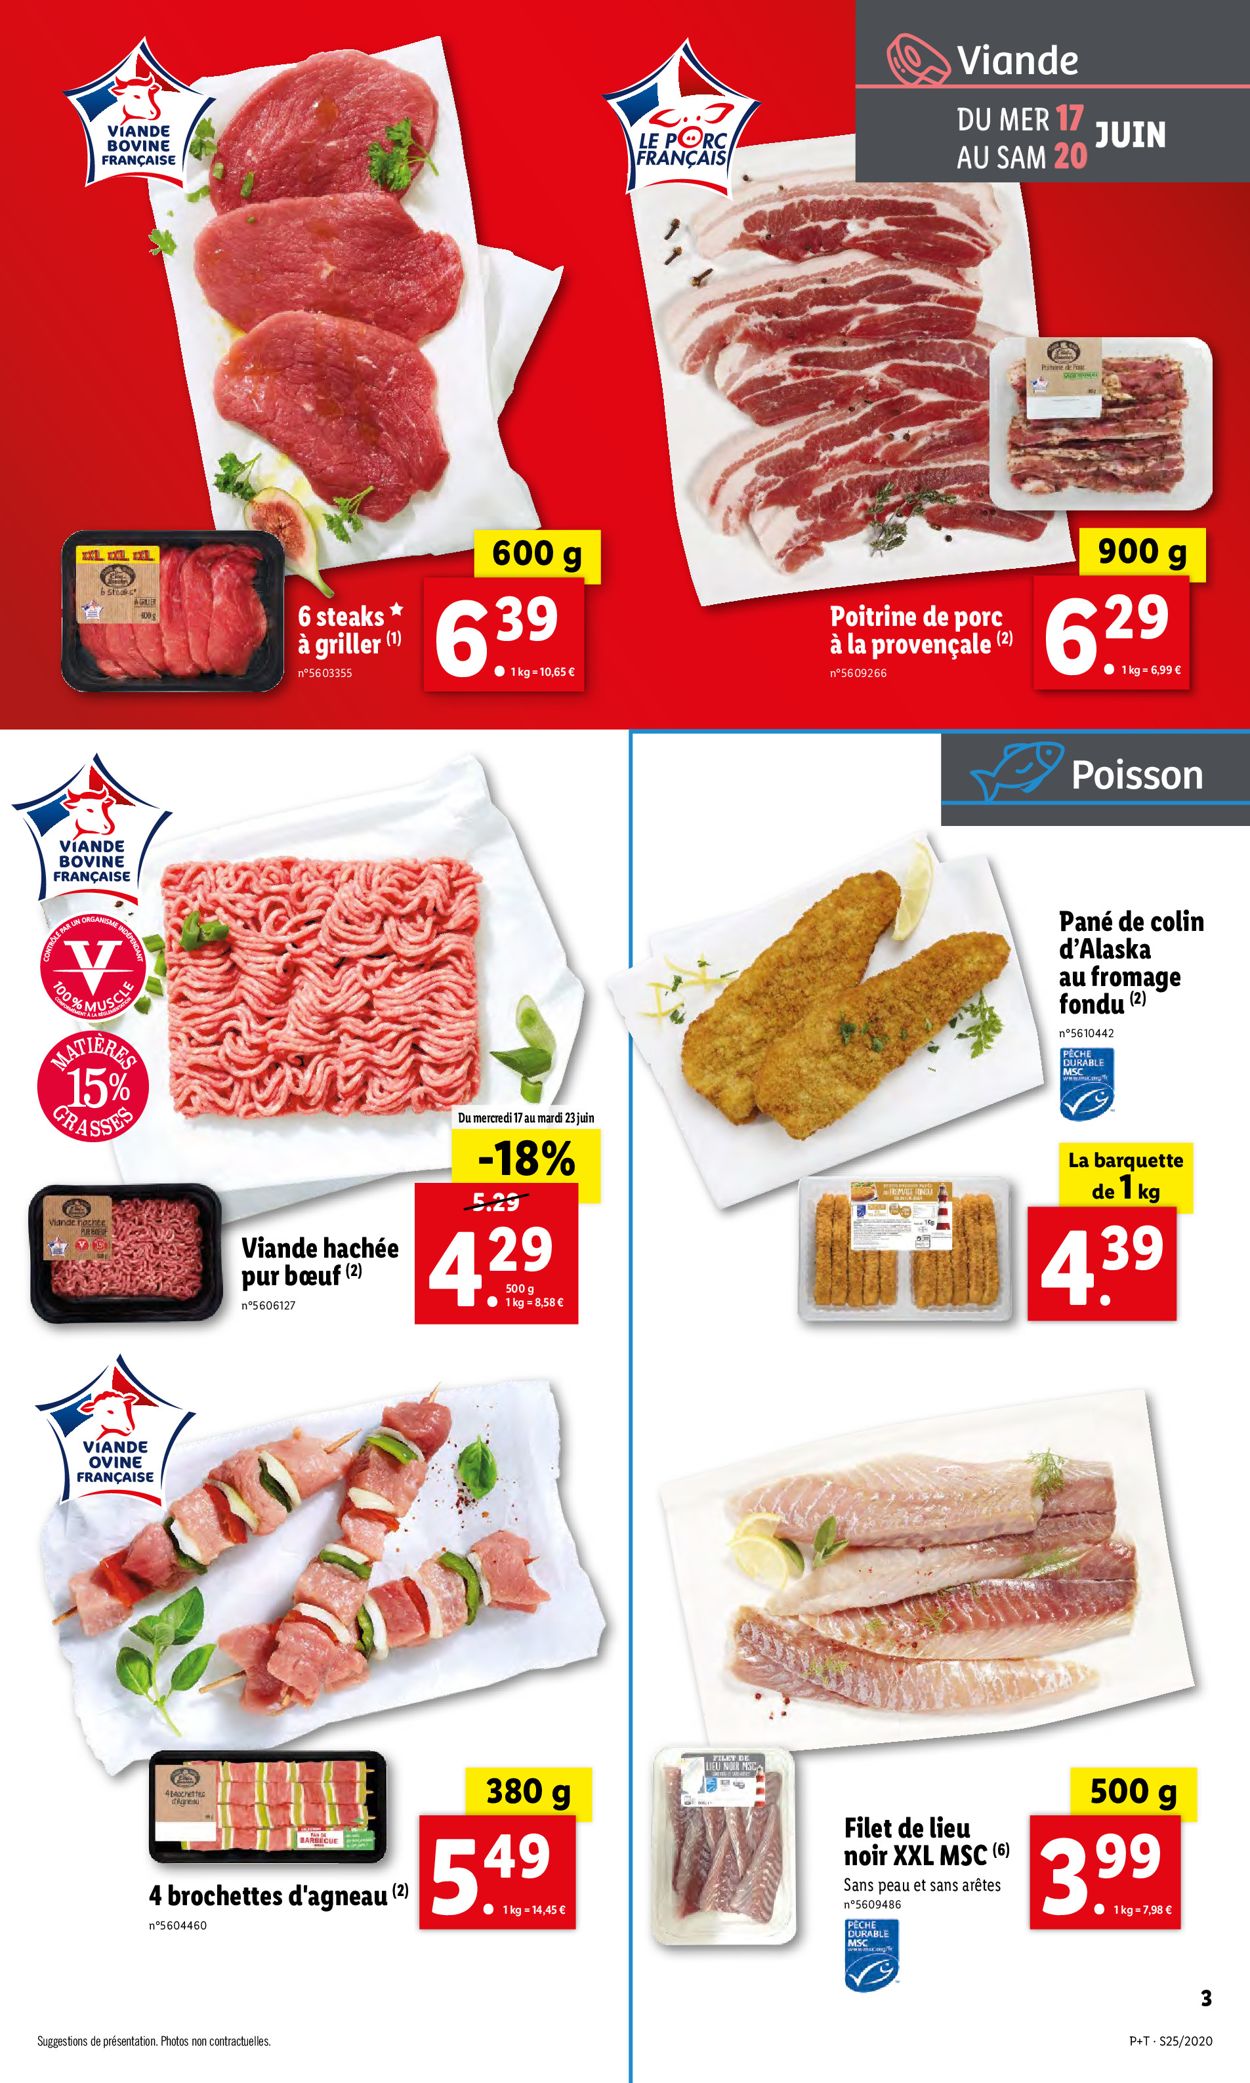 Lidl Catalogue - 17.06-23.06.2020 (Page 3)